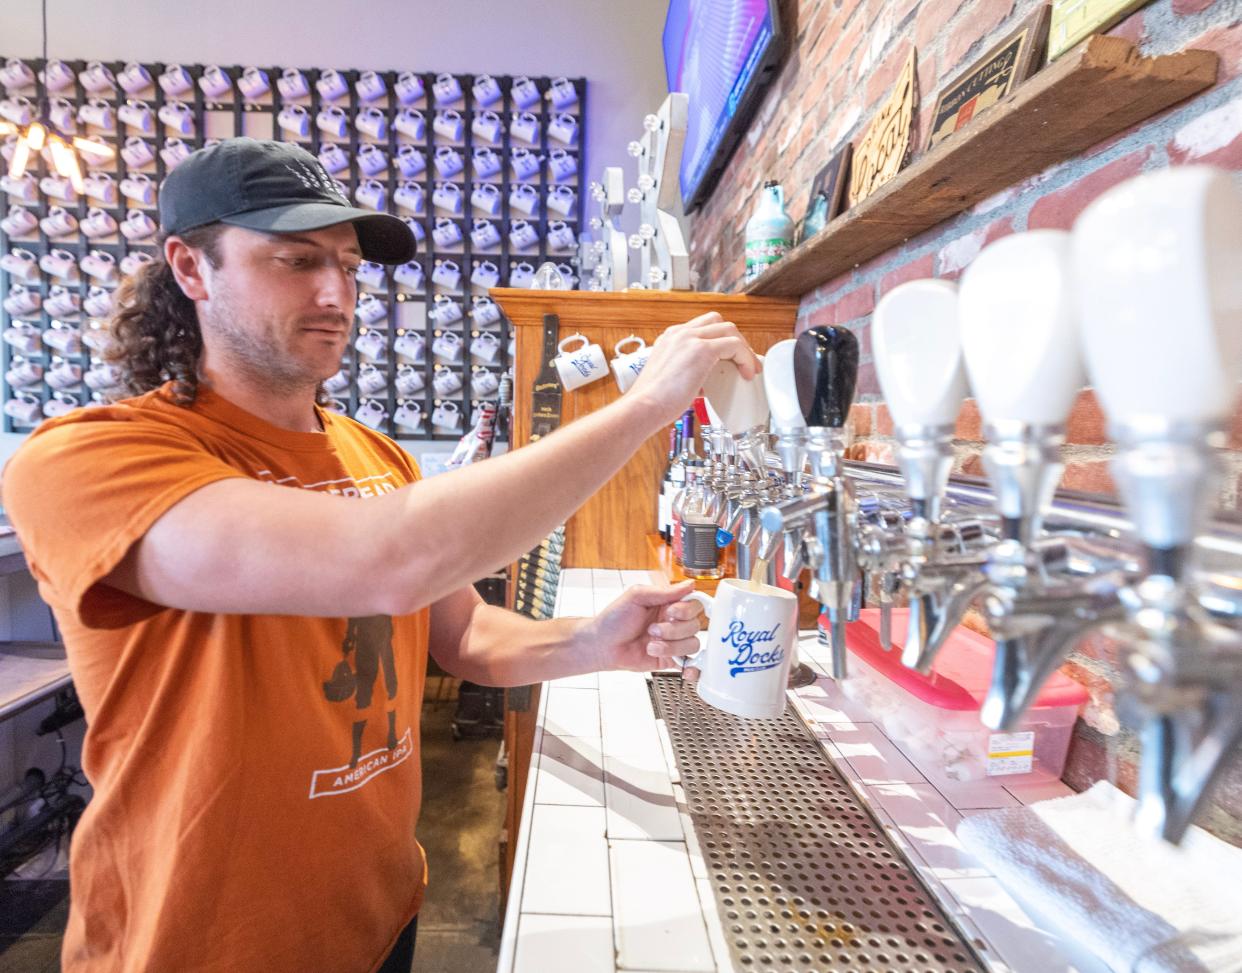 Blake Boccuti pours a beer at the Royal Docks Brewing Co. taproom in Jackson Township. The brewery has announced plans to open a taproom in Cleveland.